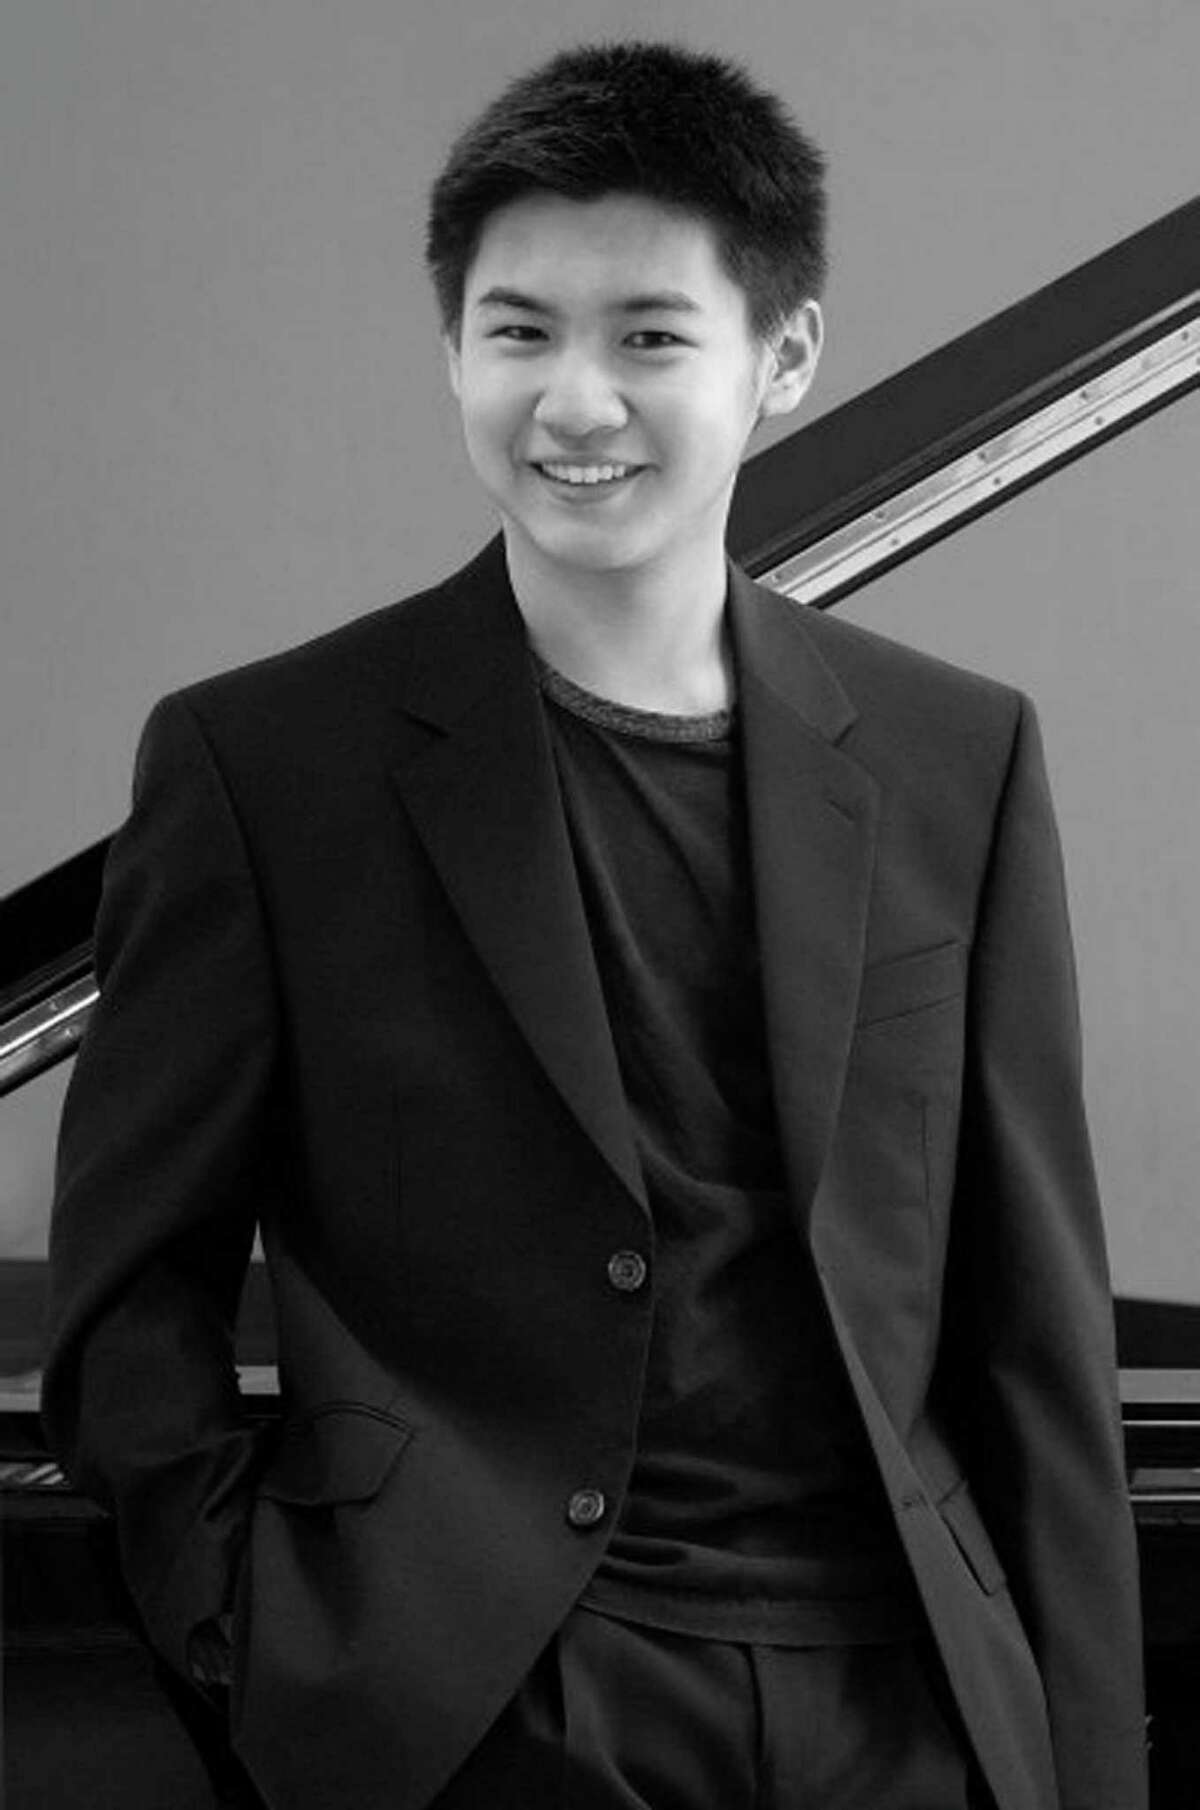 Pianist Conrad Tao gave an exciting performance at the Greenwich Music Festival, which is currently in town. "His fingers were a blur," says music reviewer Linda Phillips.